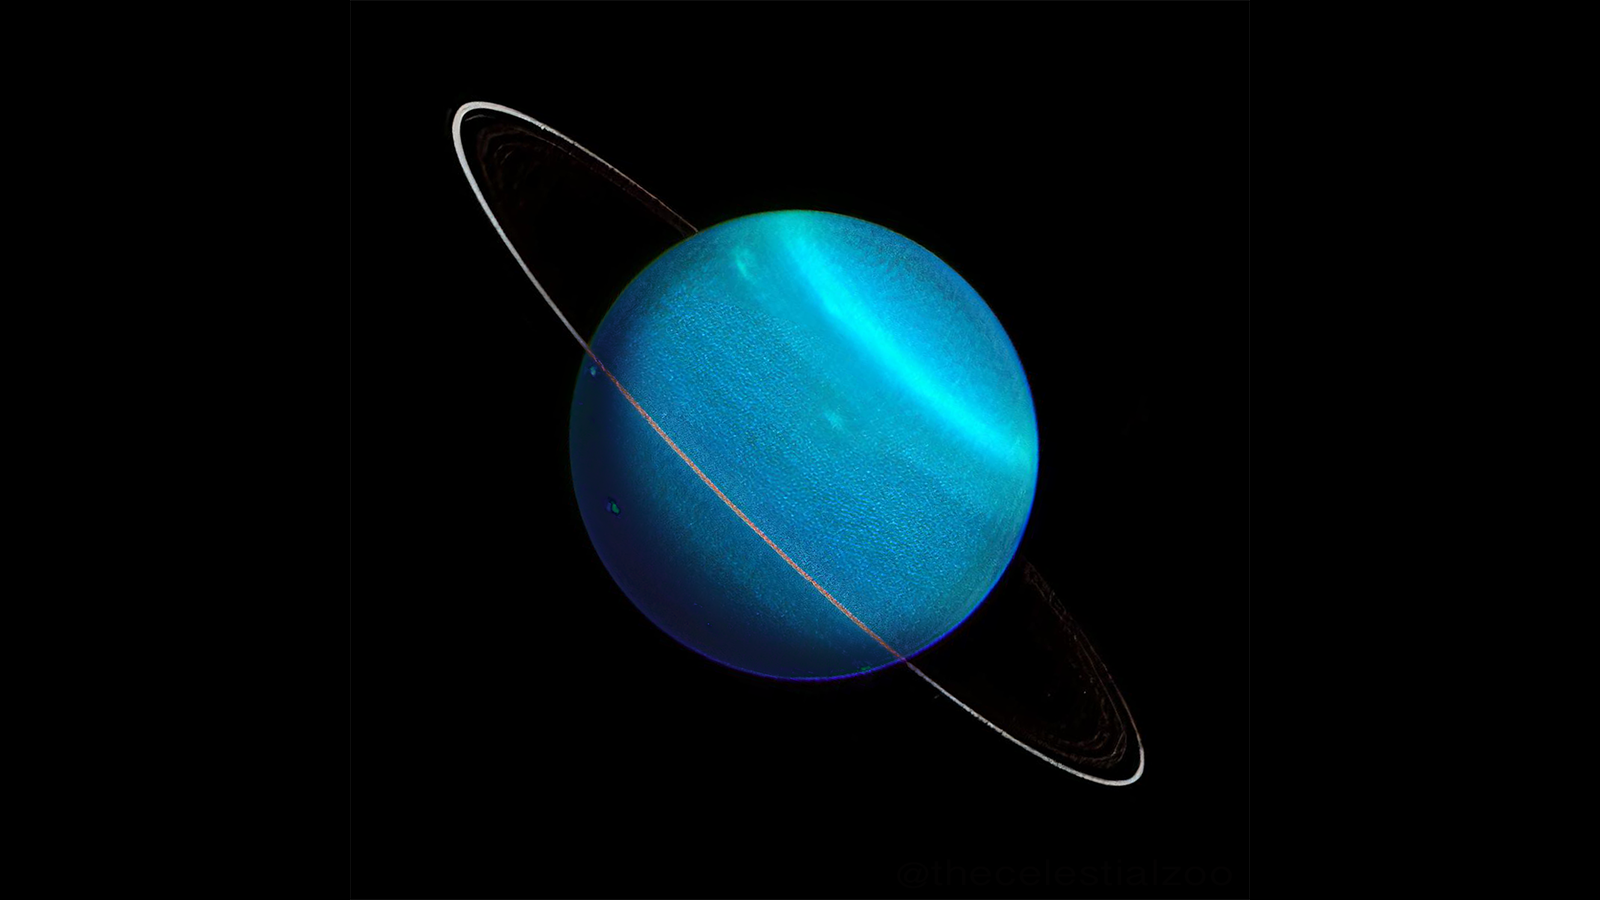 2 more rings found at Uranus; planet now known to have 13